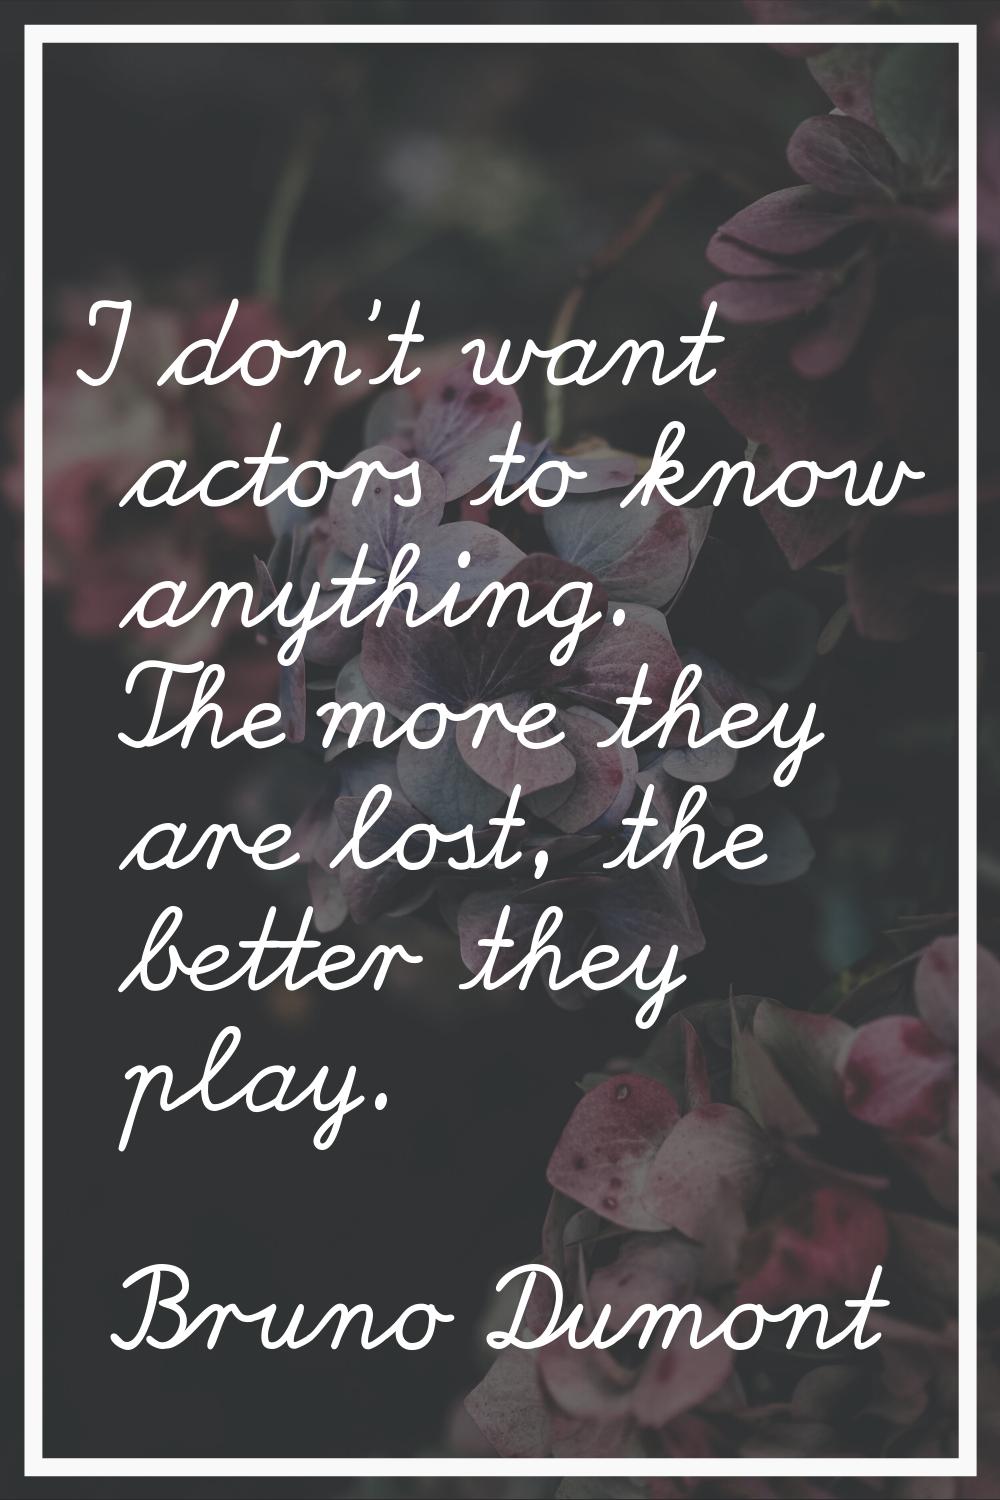 I don't want actors to know anything. The more they are lost, the better they play.